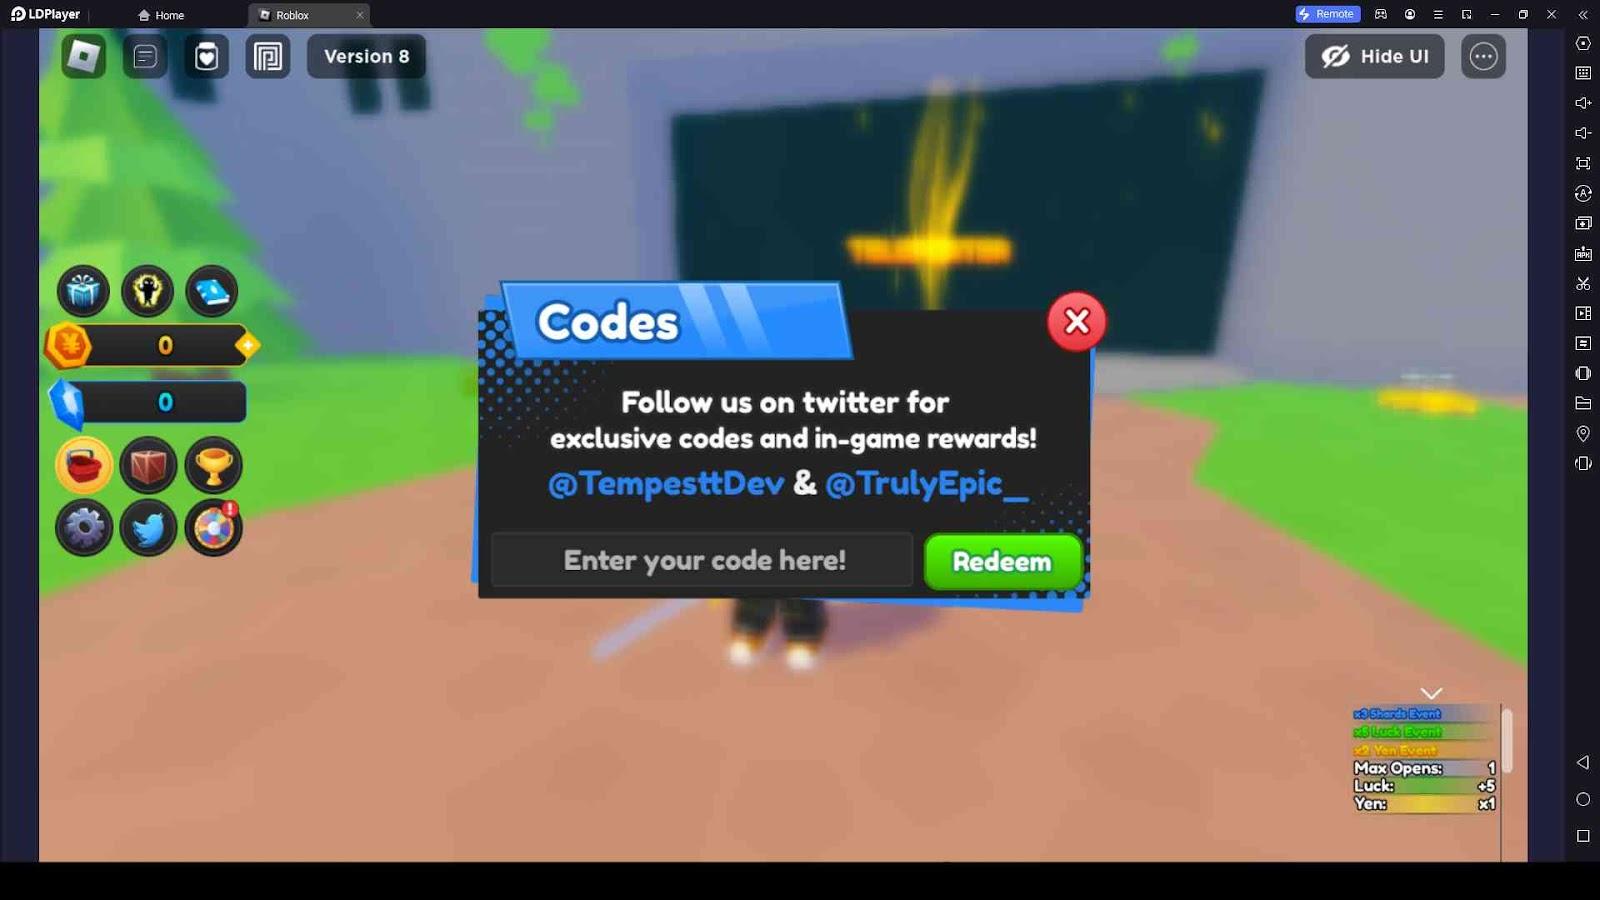 Roblox Anime Idle Simulator Redeem Codes Guide for Players of Roblox